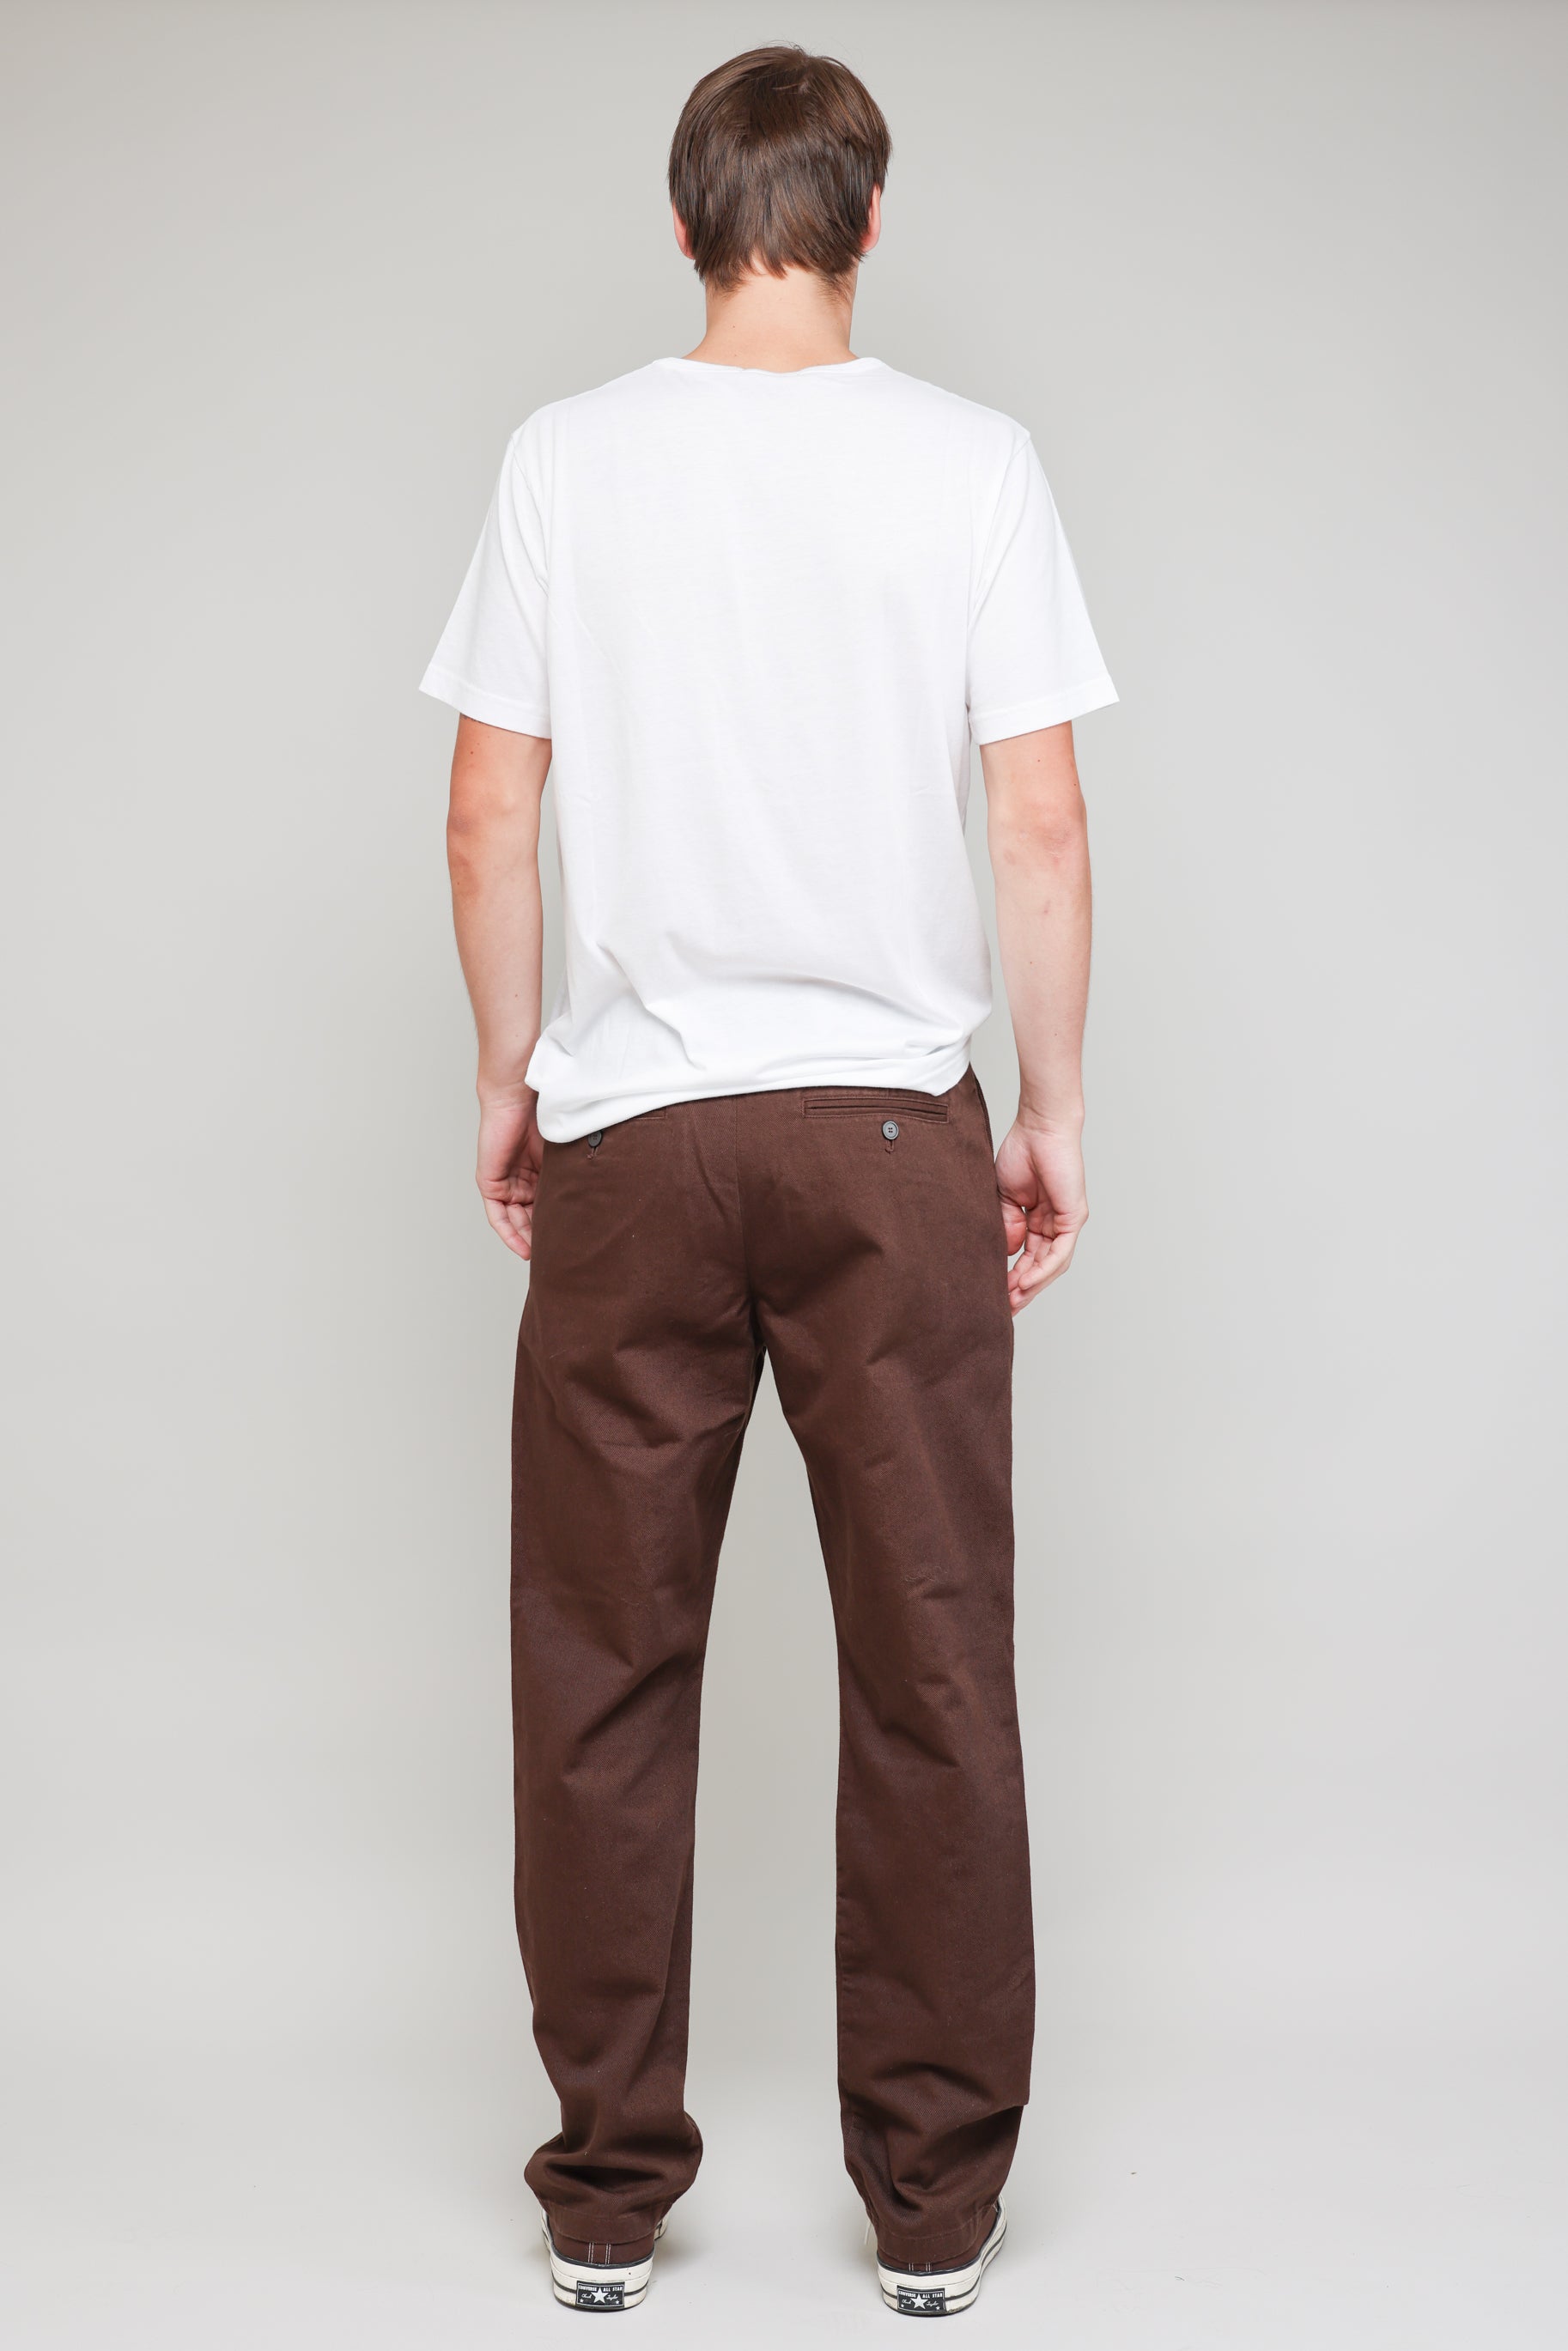 Pleated Chino Classic Tumbler Drill in Brown 04